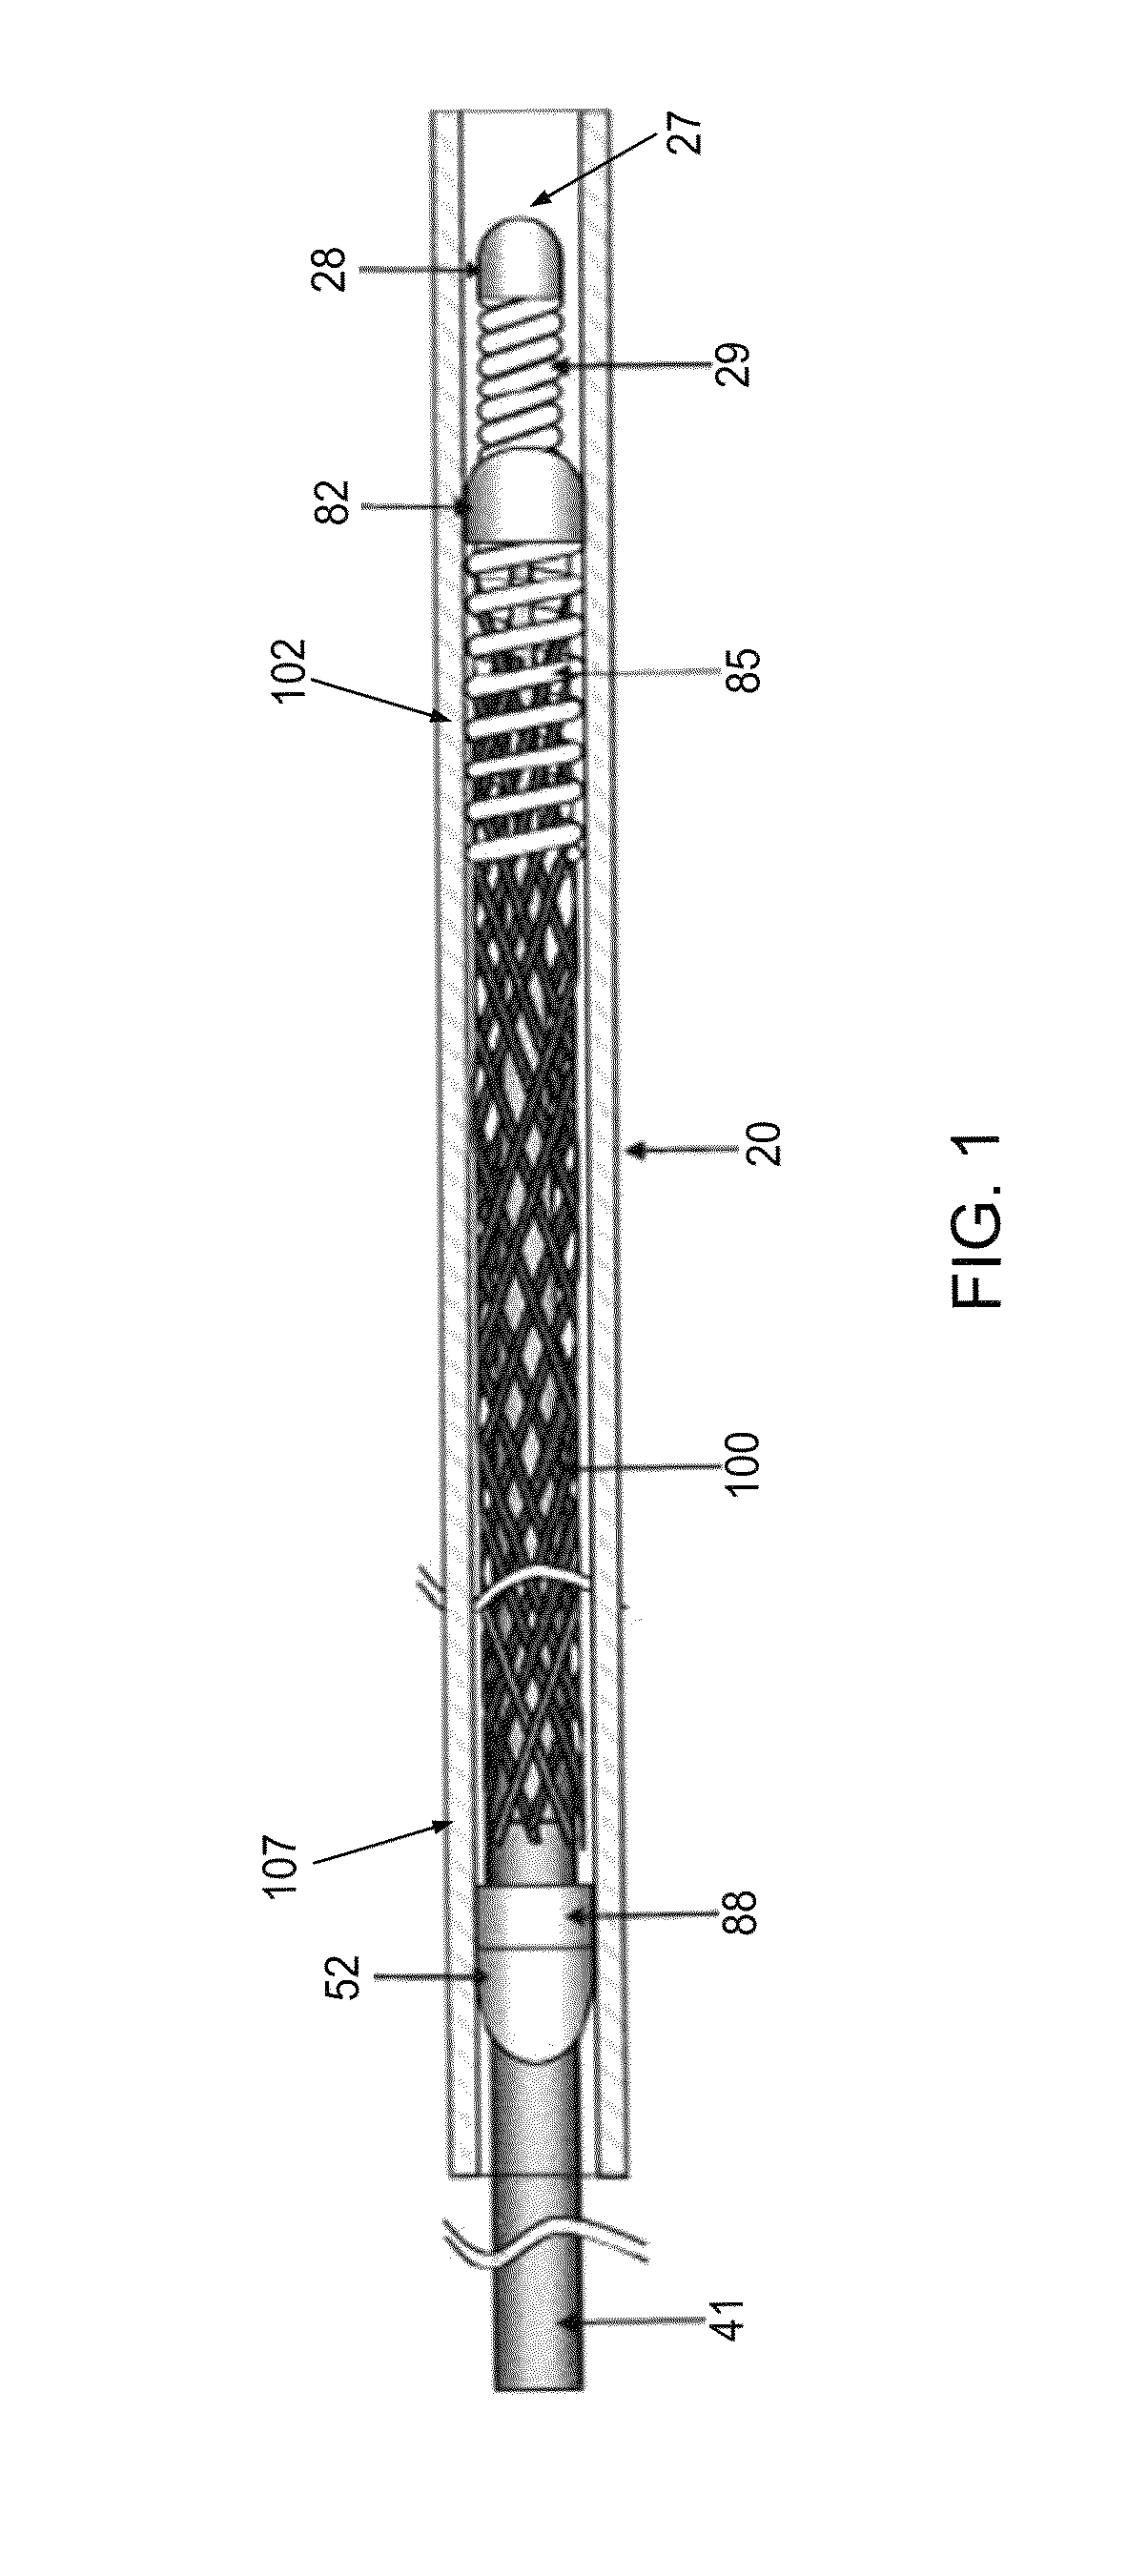 Methods and apparatus for luminal stenting